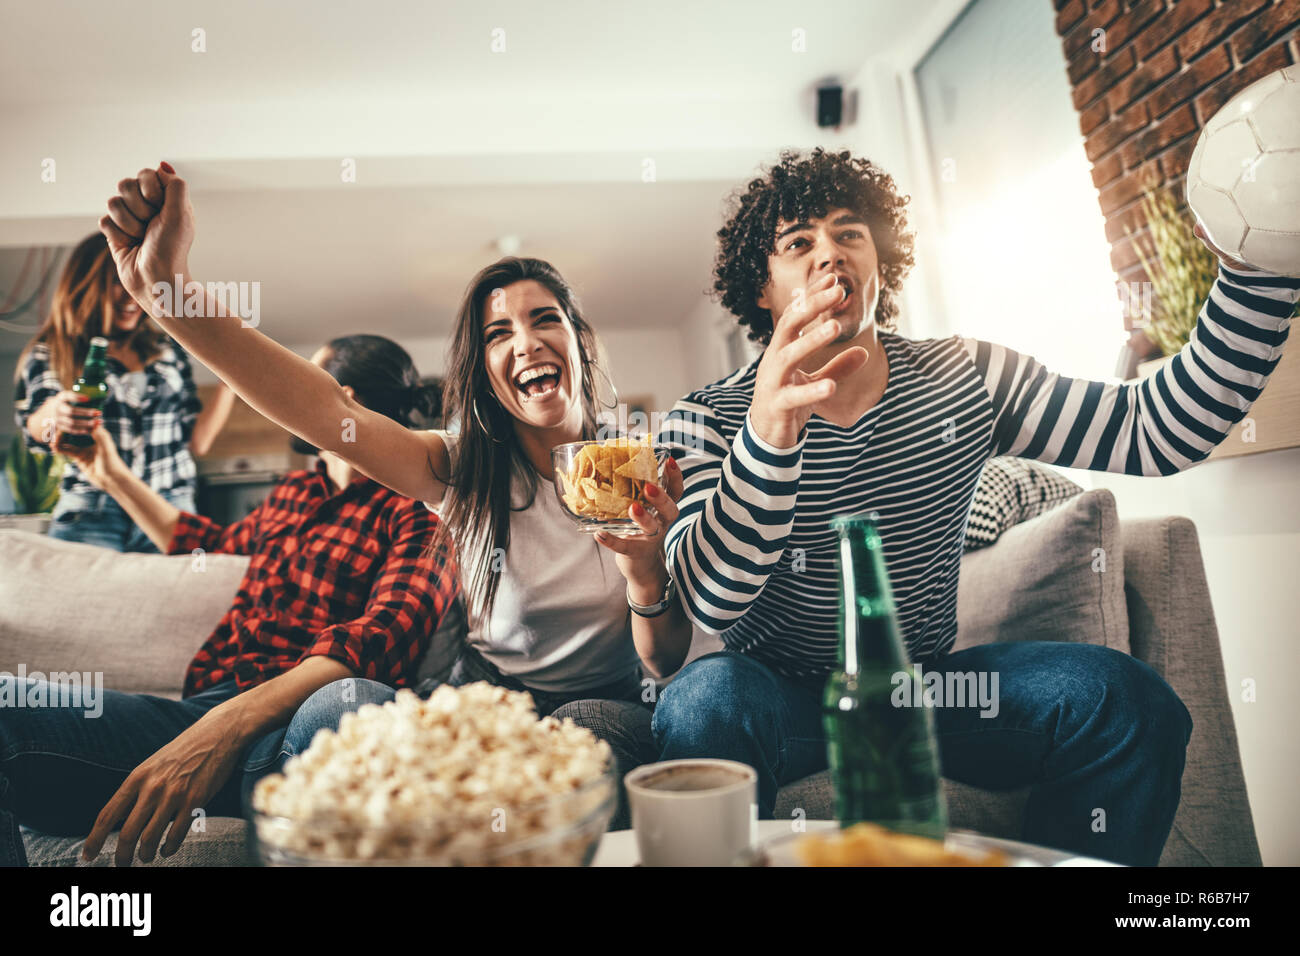 Friends are fans of sports games as football love spending their free time at home together. They are screaming and gesturing for a victory. Stock Photo